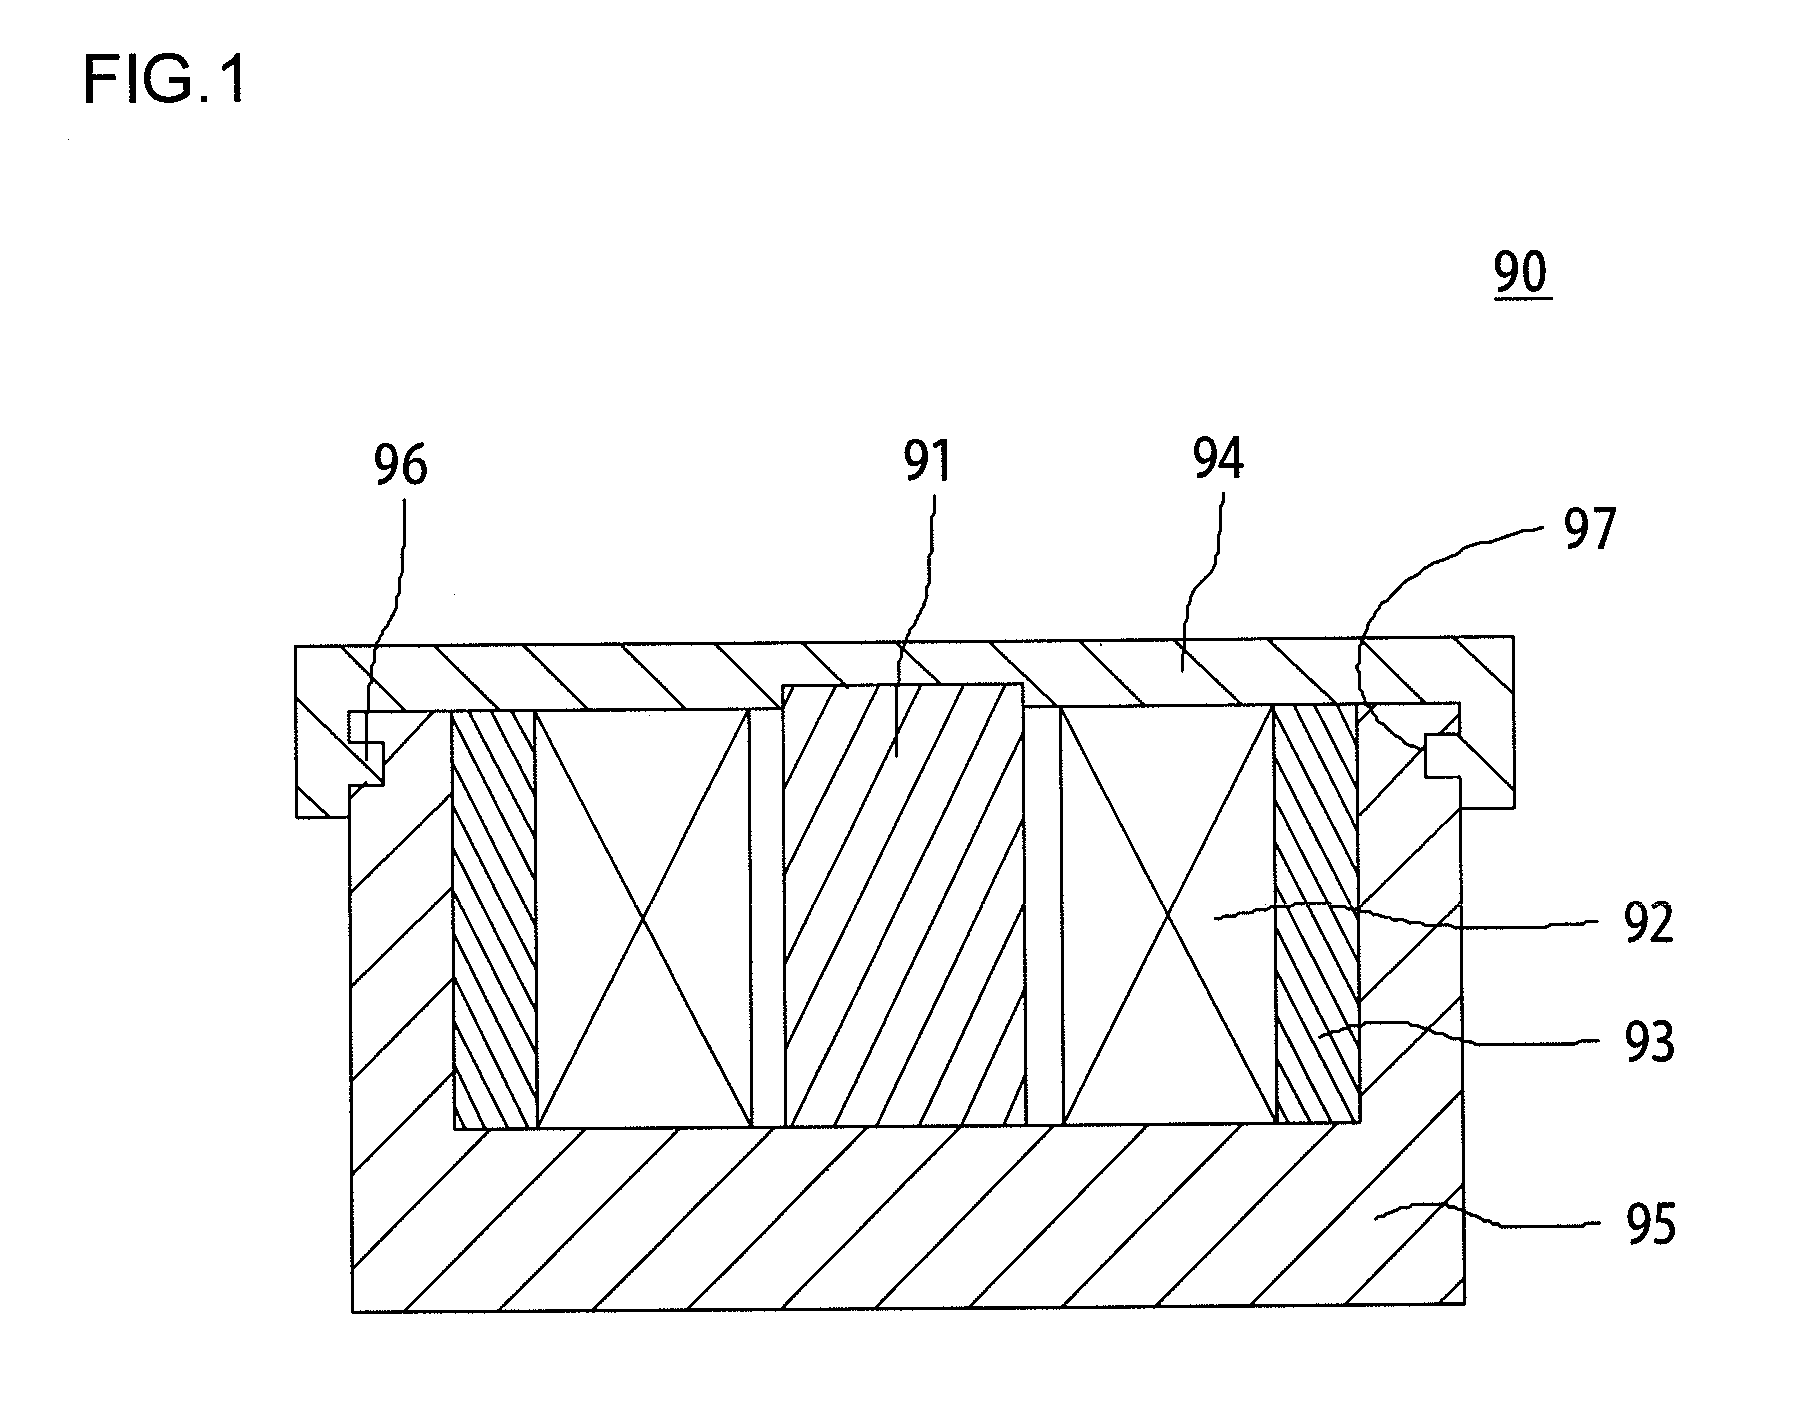 Sound Sensing Apparatus and Musical Instrument